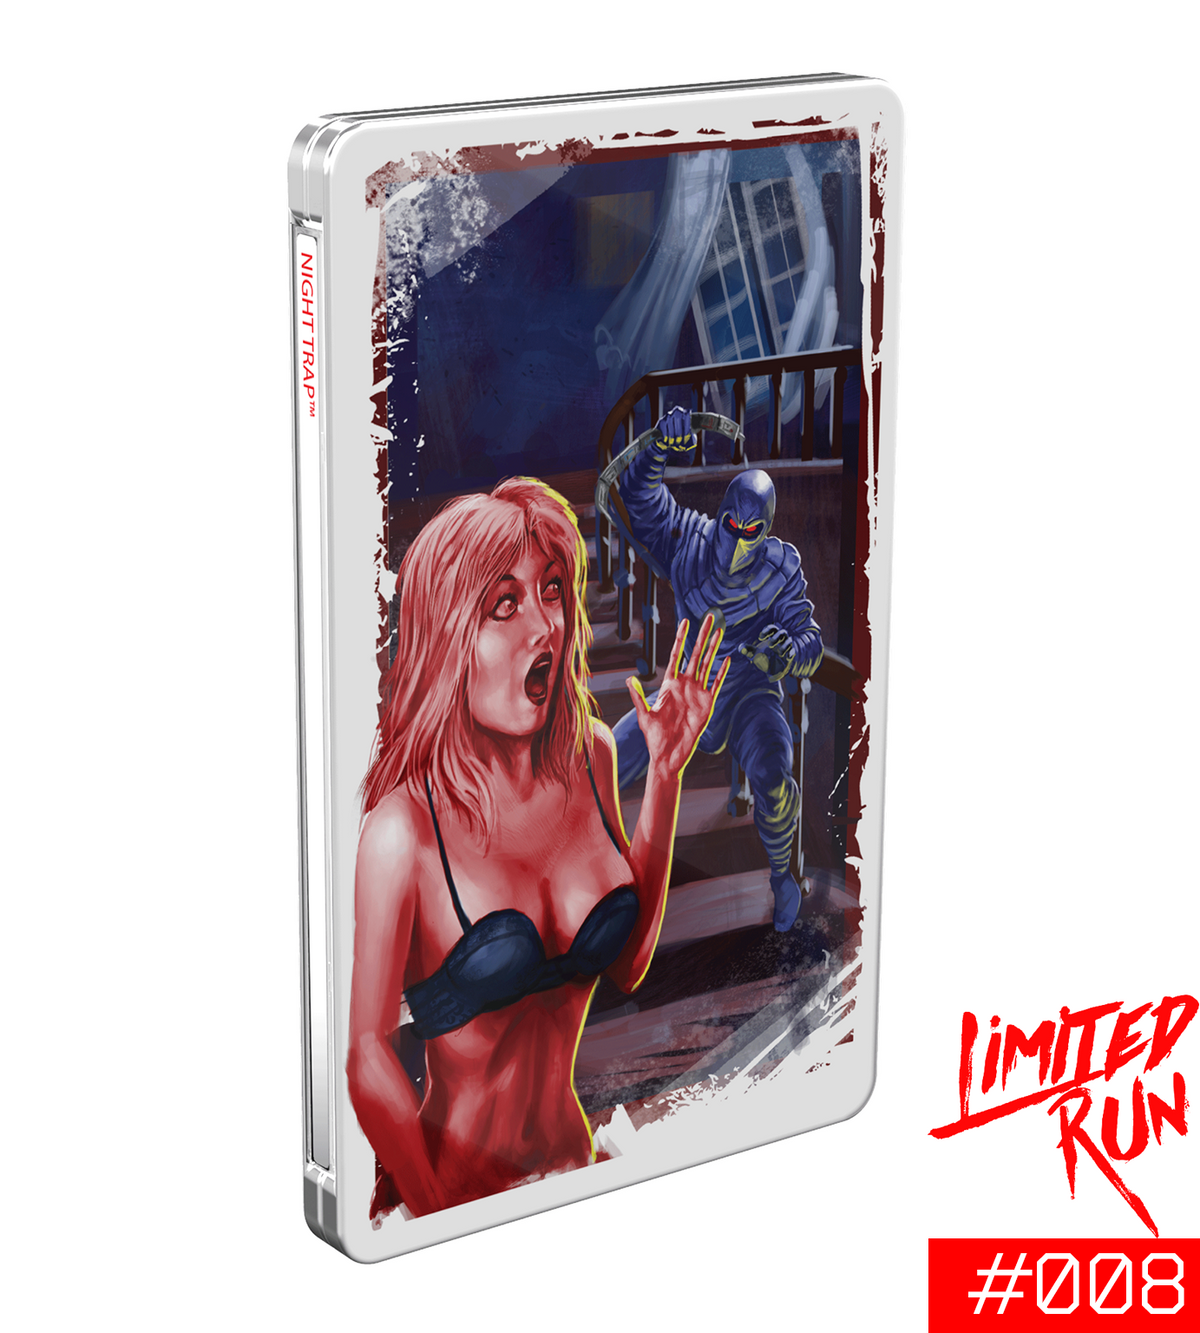 Switch Limited Run #8: Night Trap Classic Edition